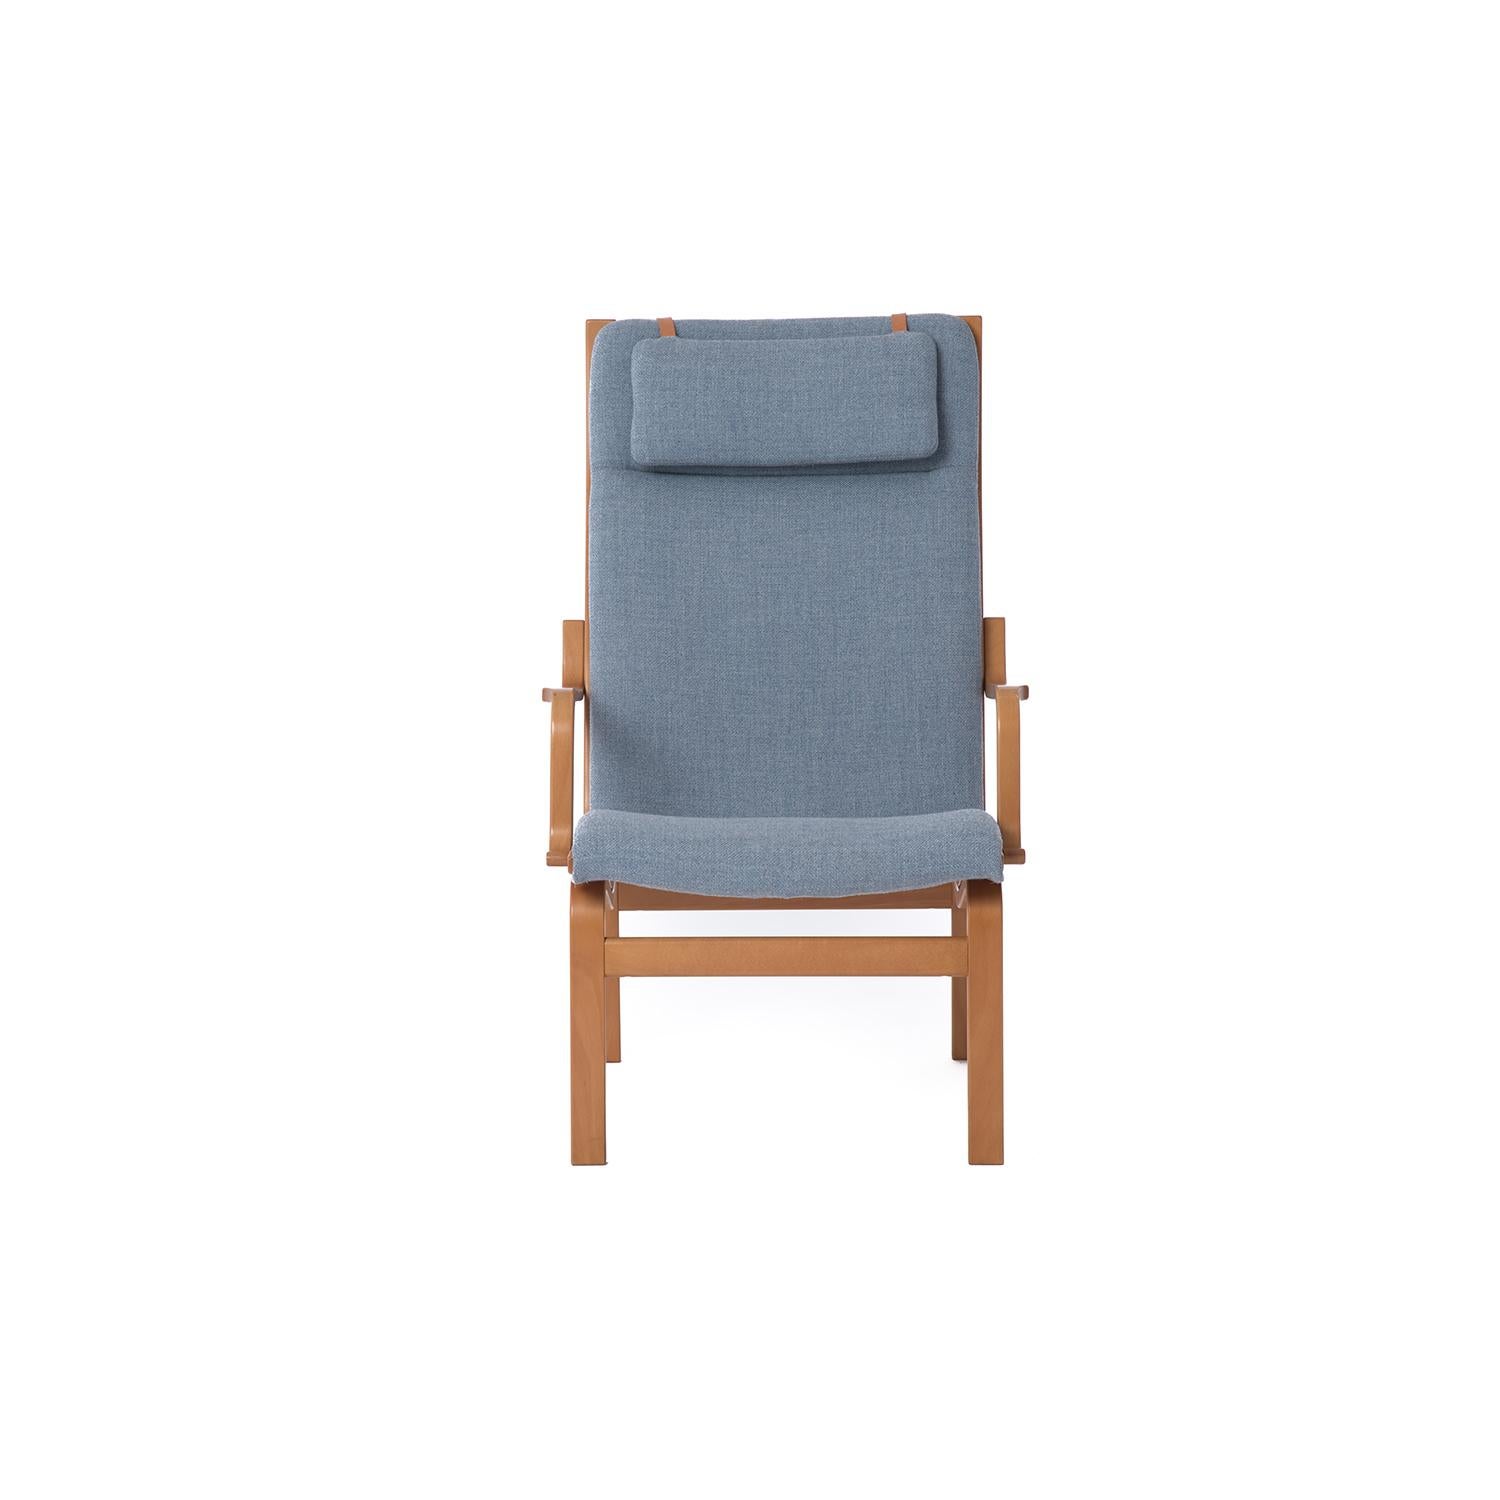 This Scandinavian Modern lounge chair is ergonomically designed for comfort and is lightweight and easy to move and transport. Honey colored beech frame and new upholstery by Knoll Textiles. Head pillow has leather tab connection detail. Design by